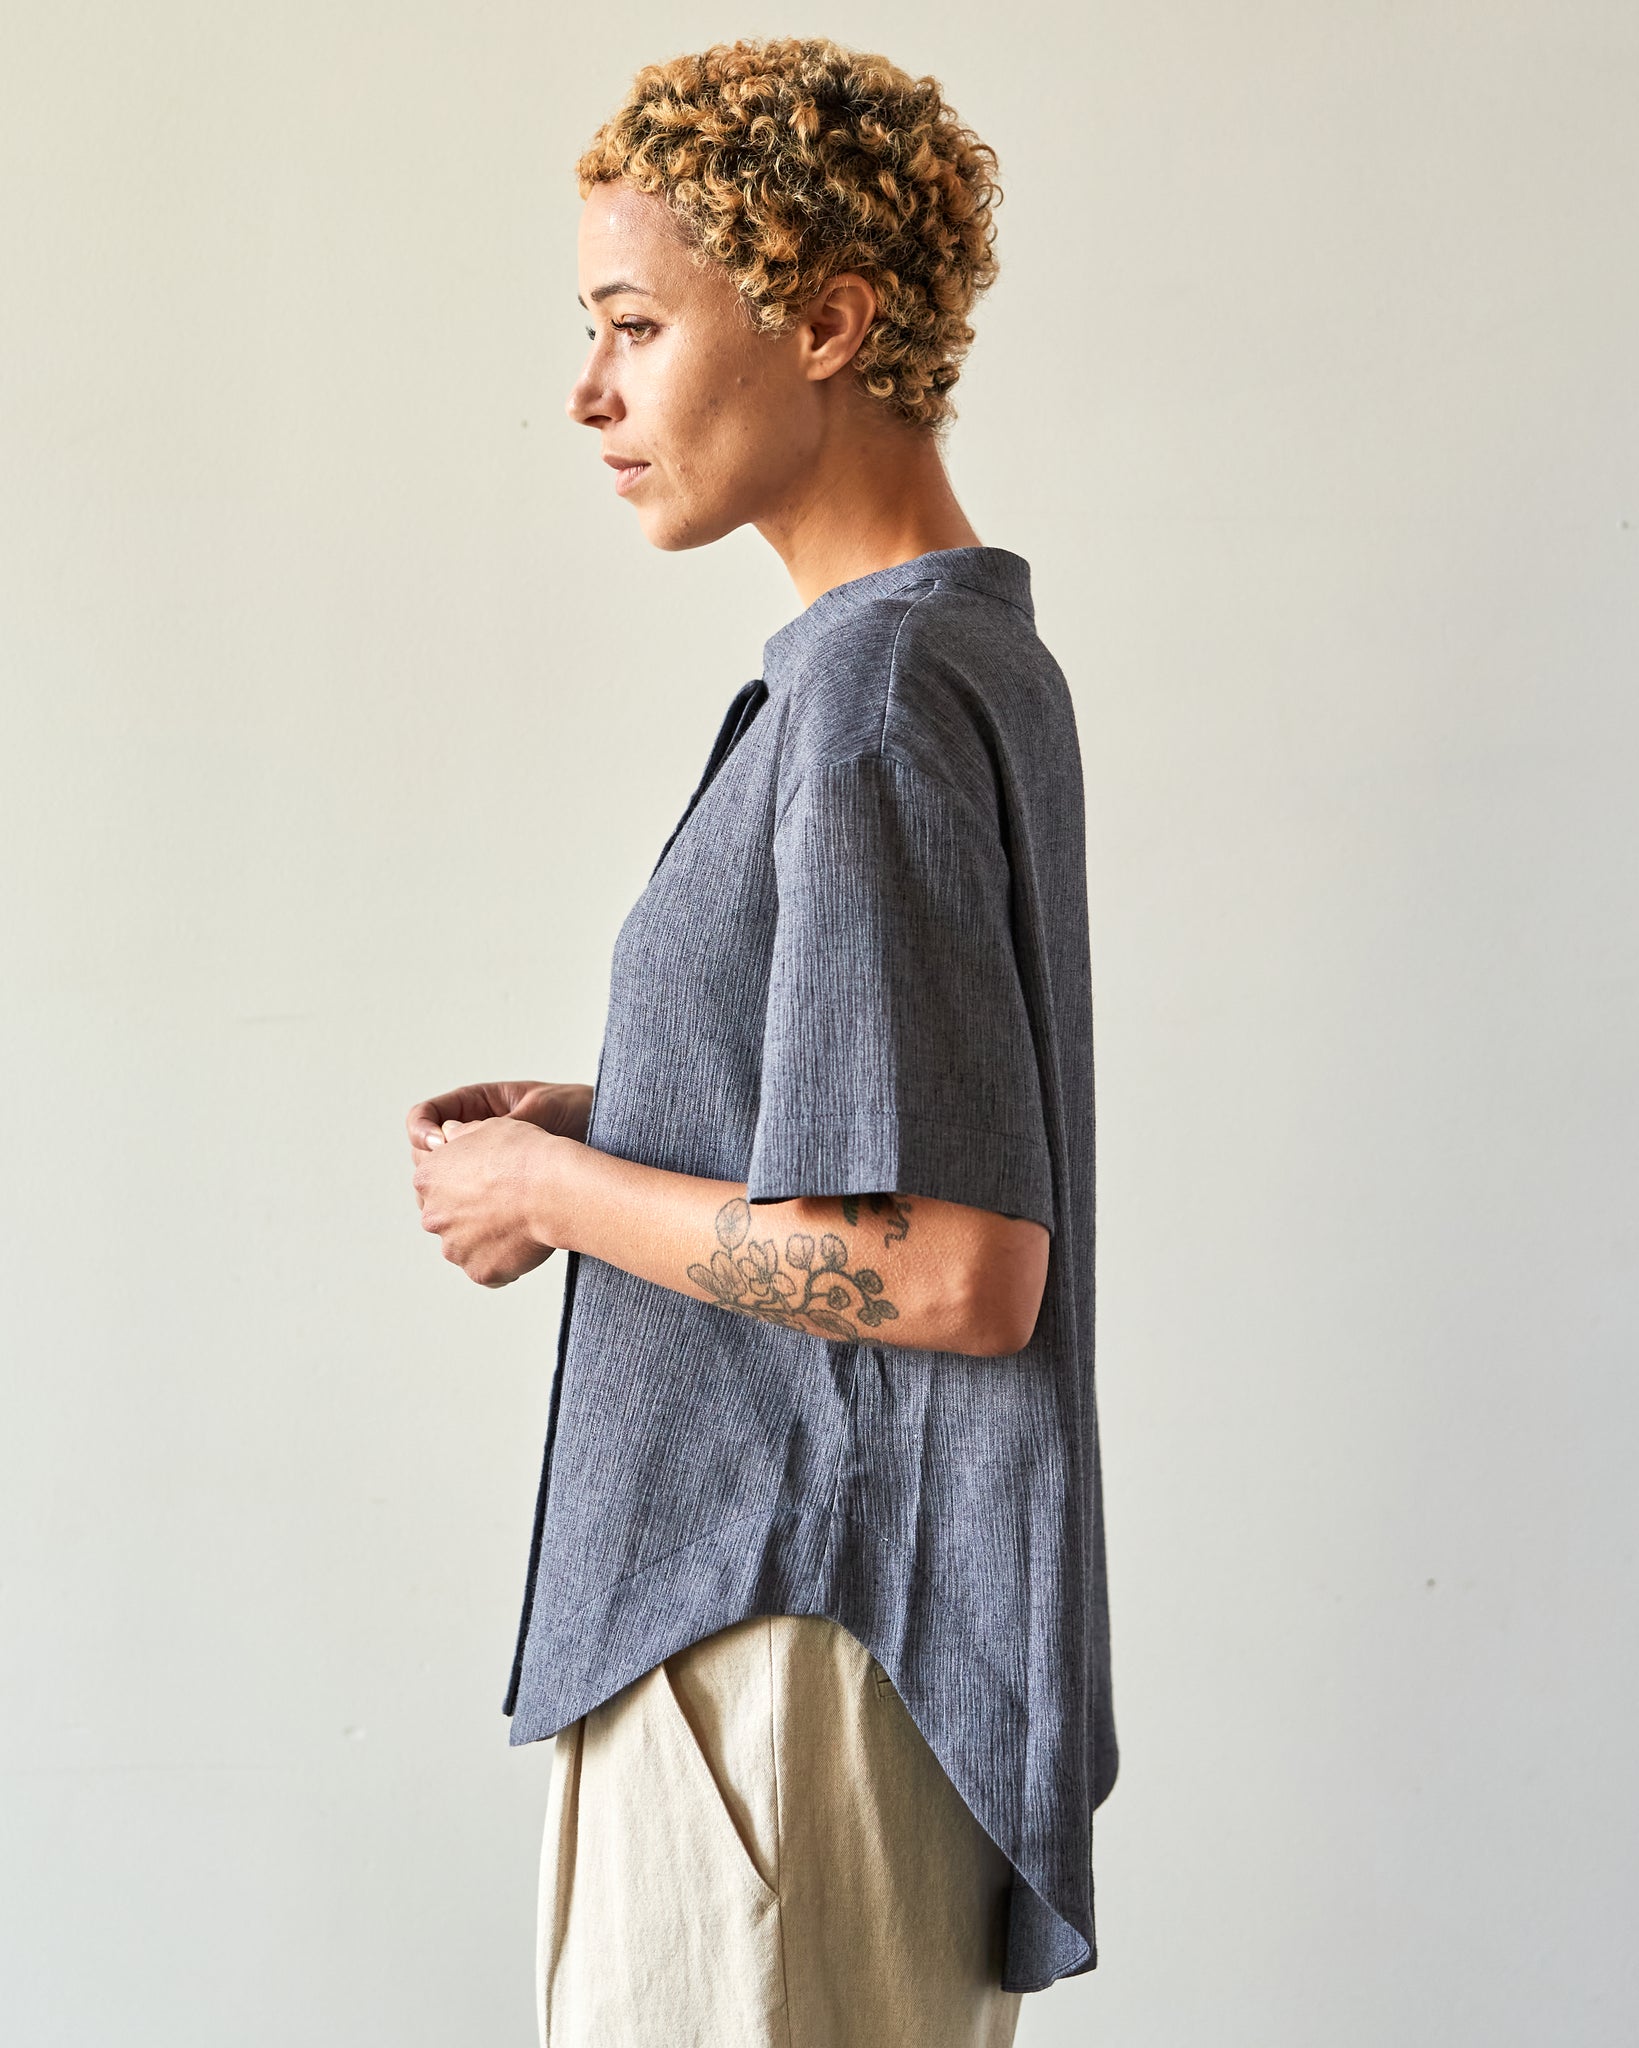 7115 Cap Sleeve Button Down, Gray Crinkle